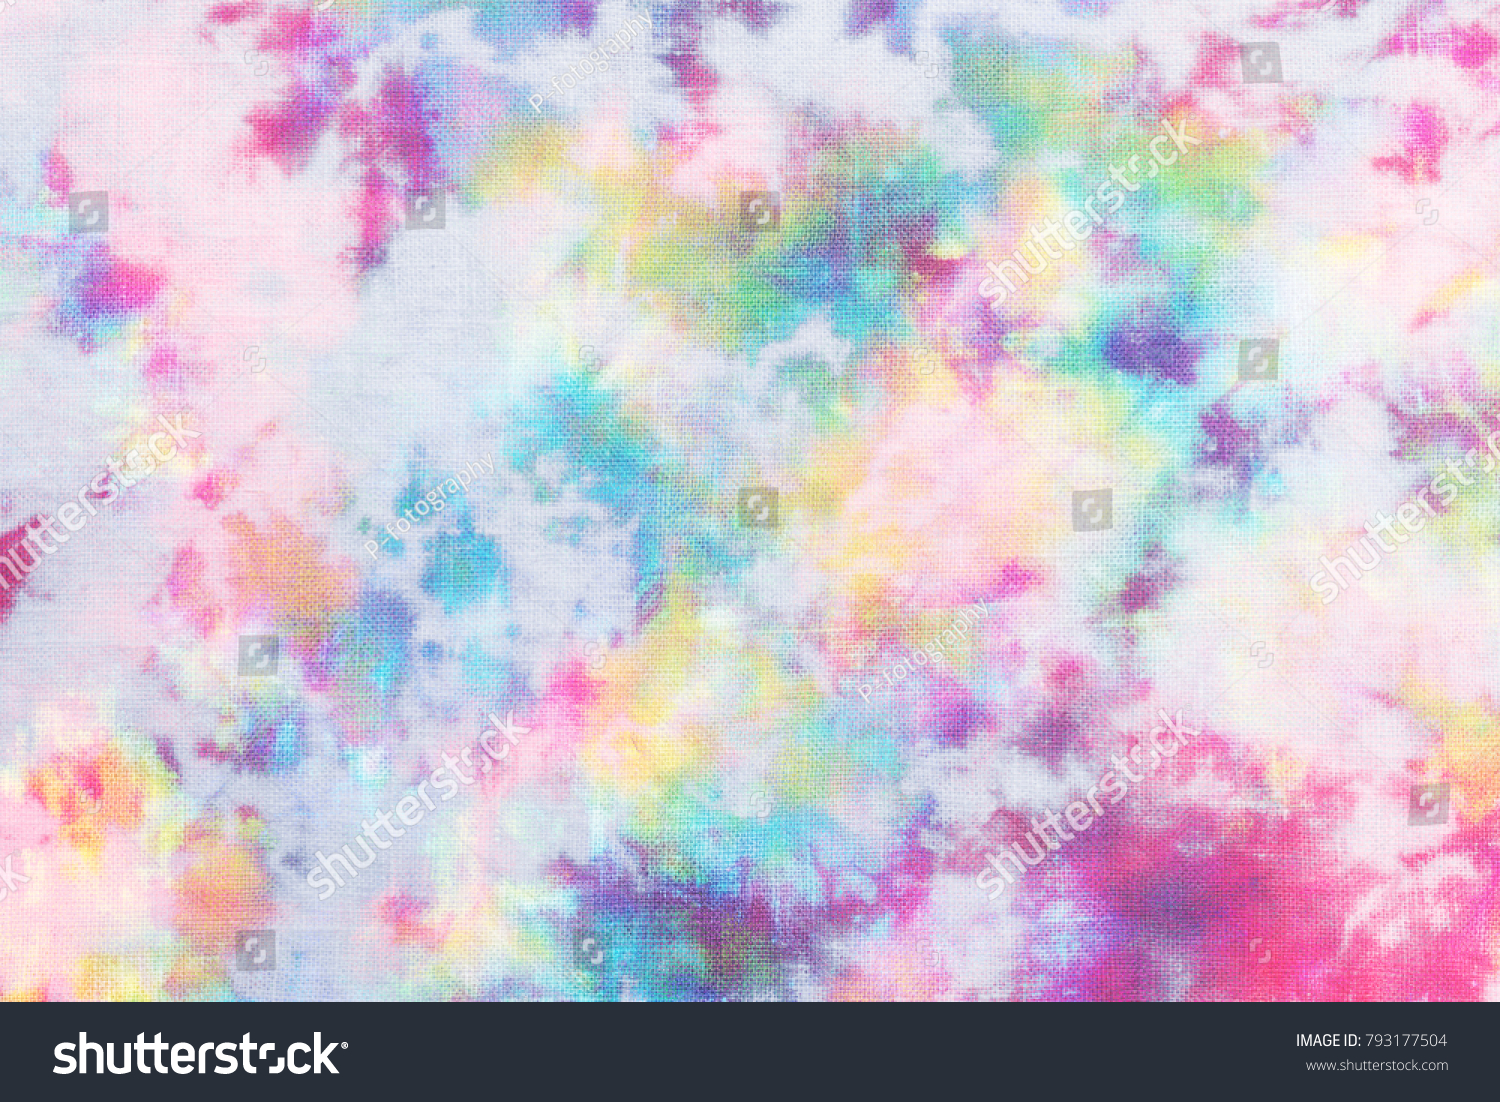 tie dye pattern abstract background. #793177504